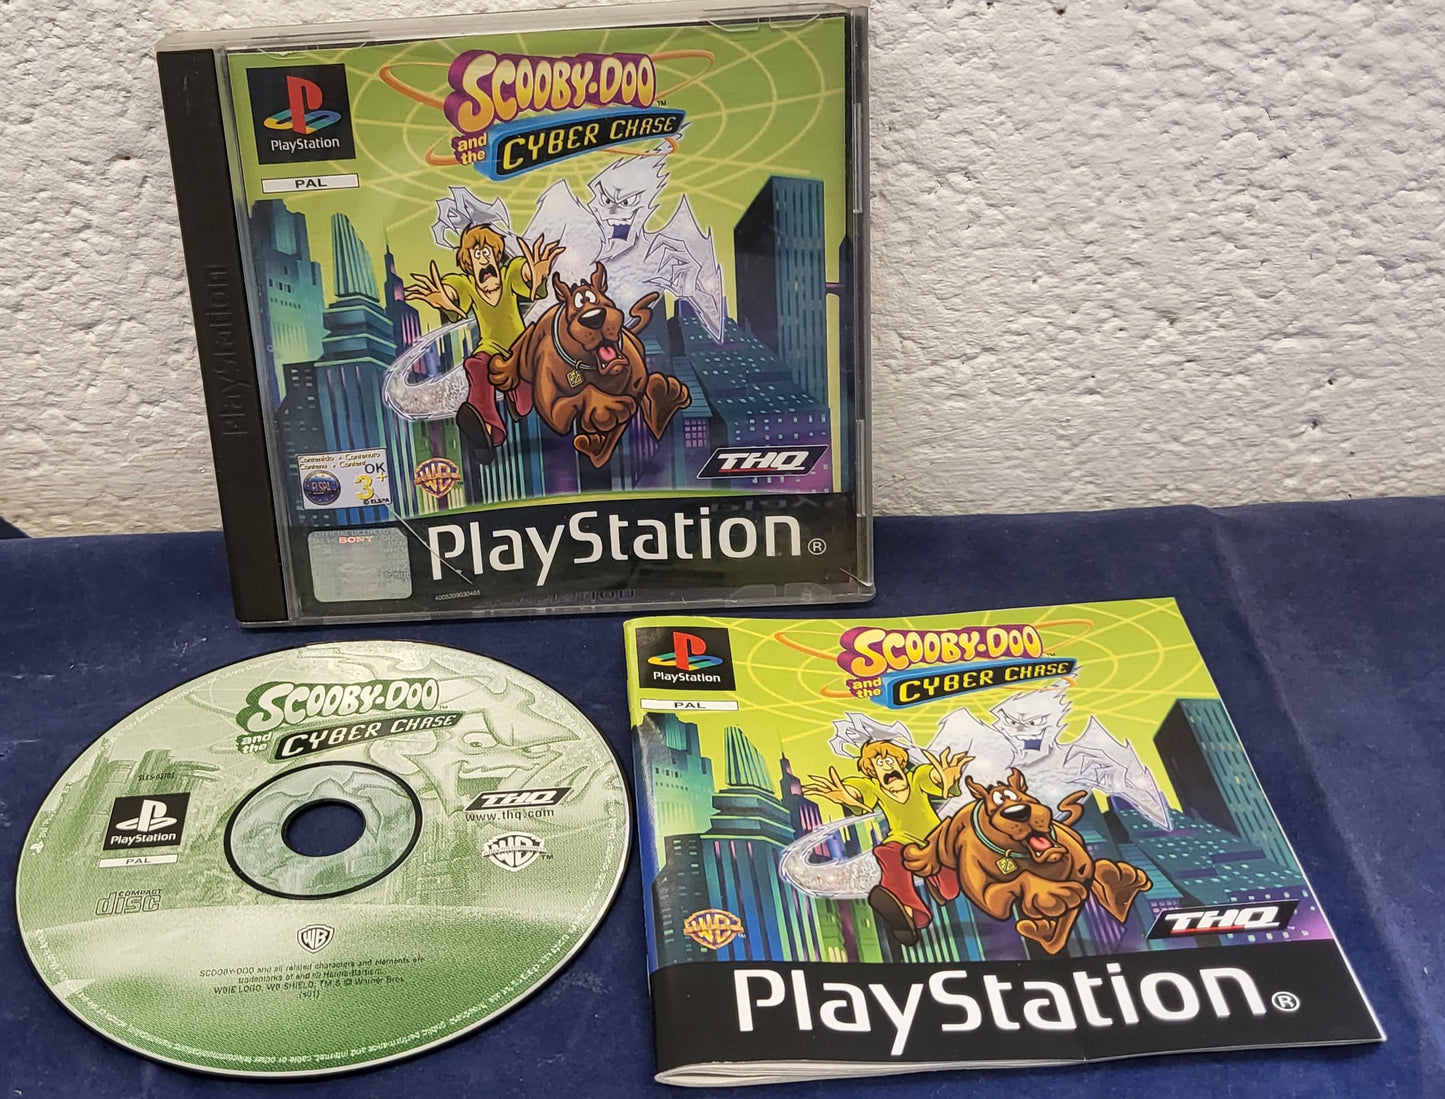 Scooby Doo and the Cyber Chase Sony Playstation 1 (PS1) Game